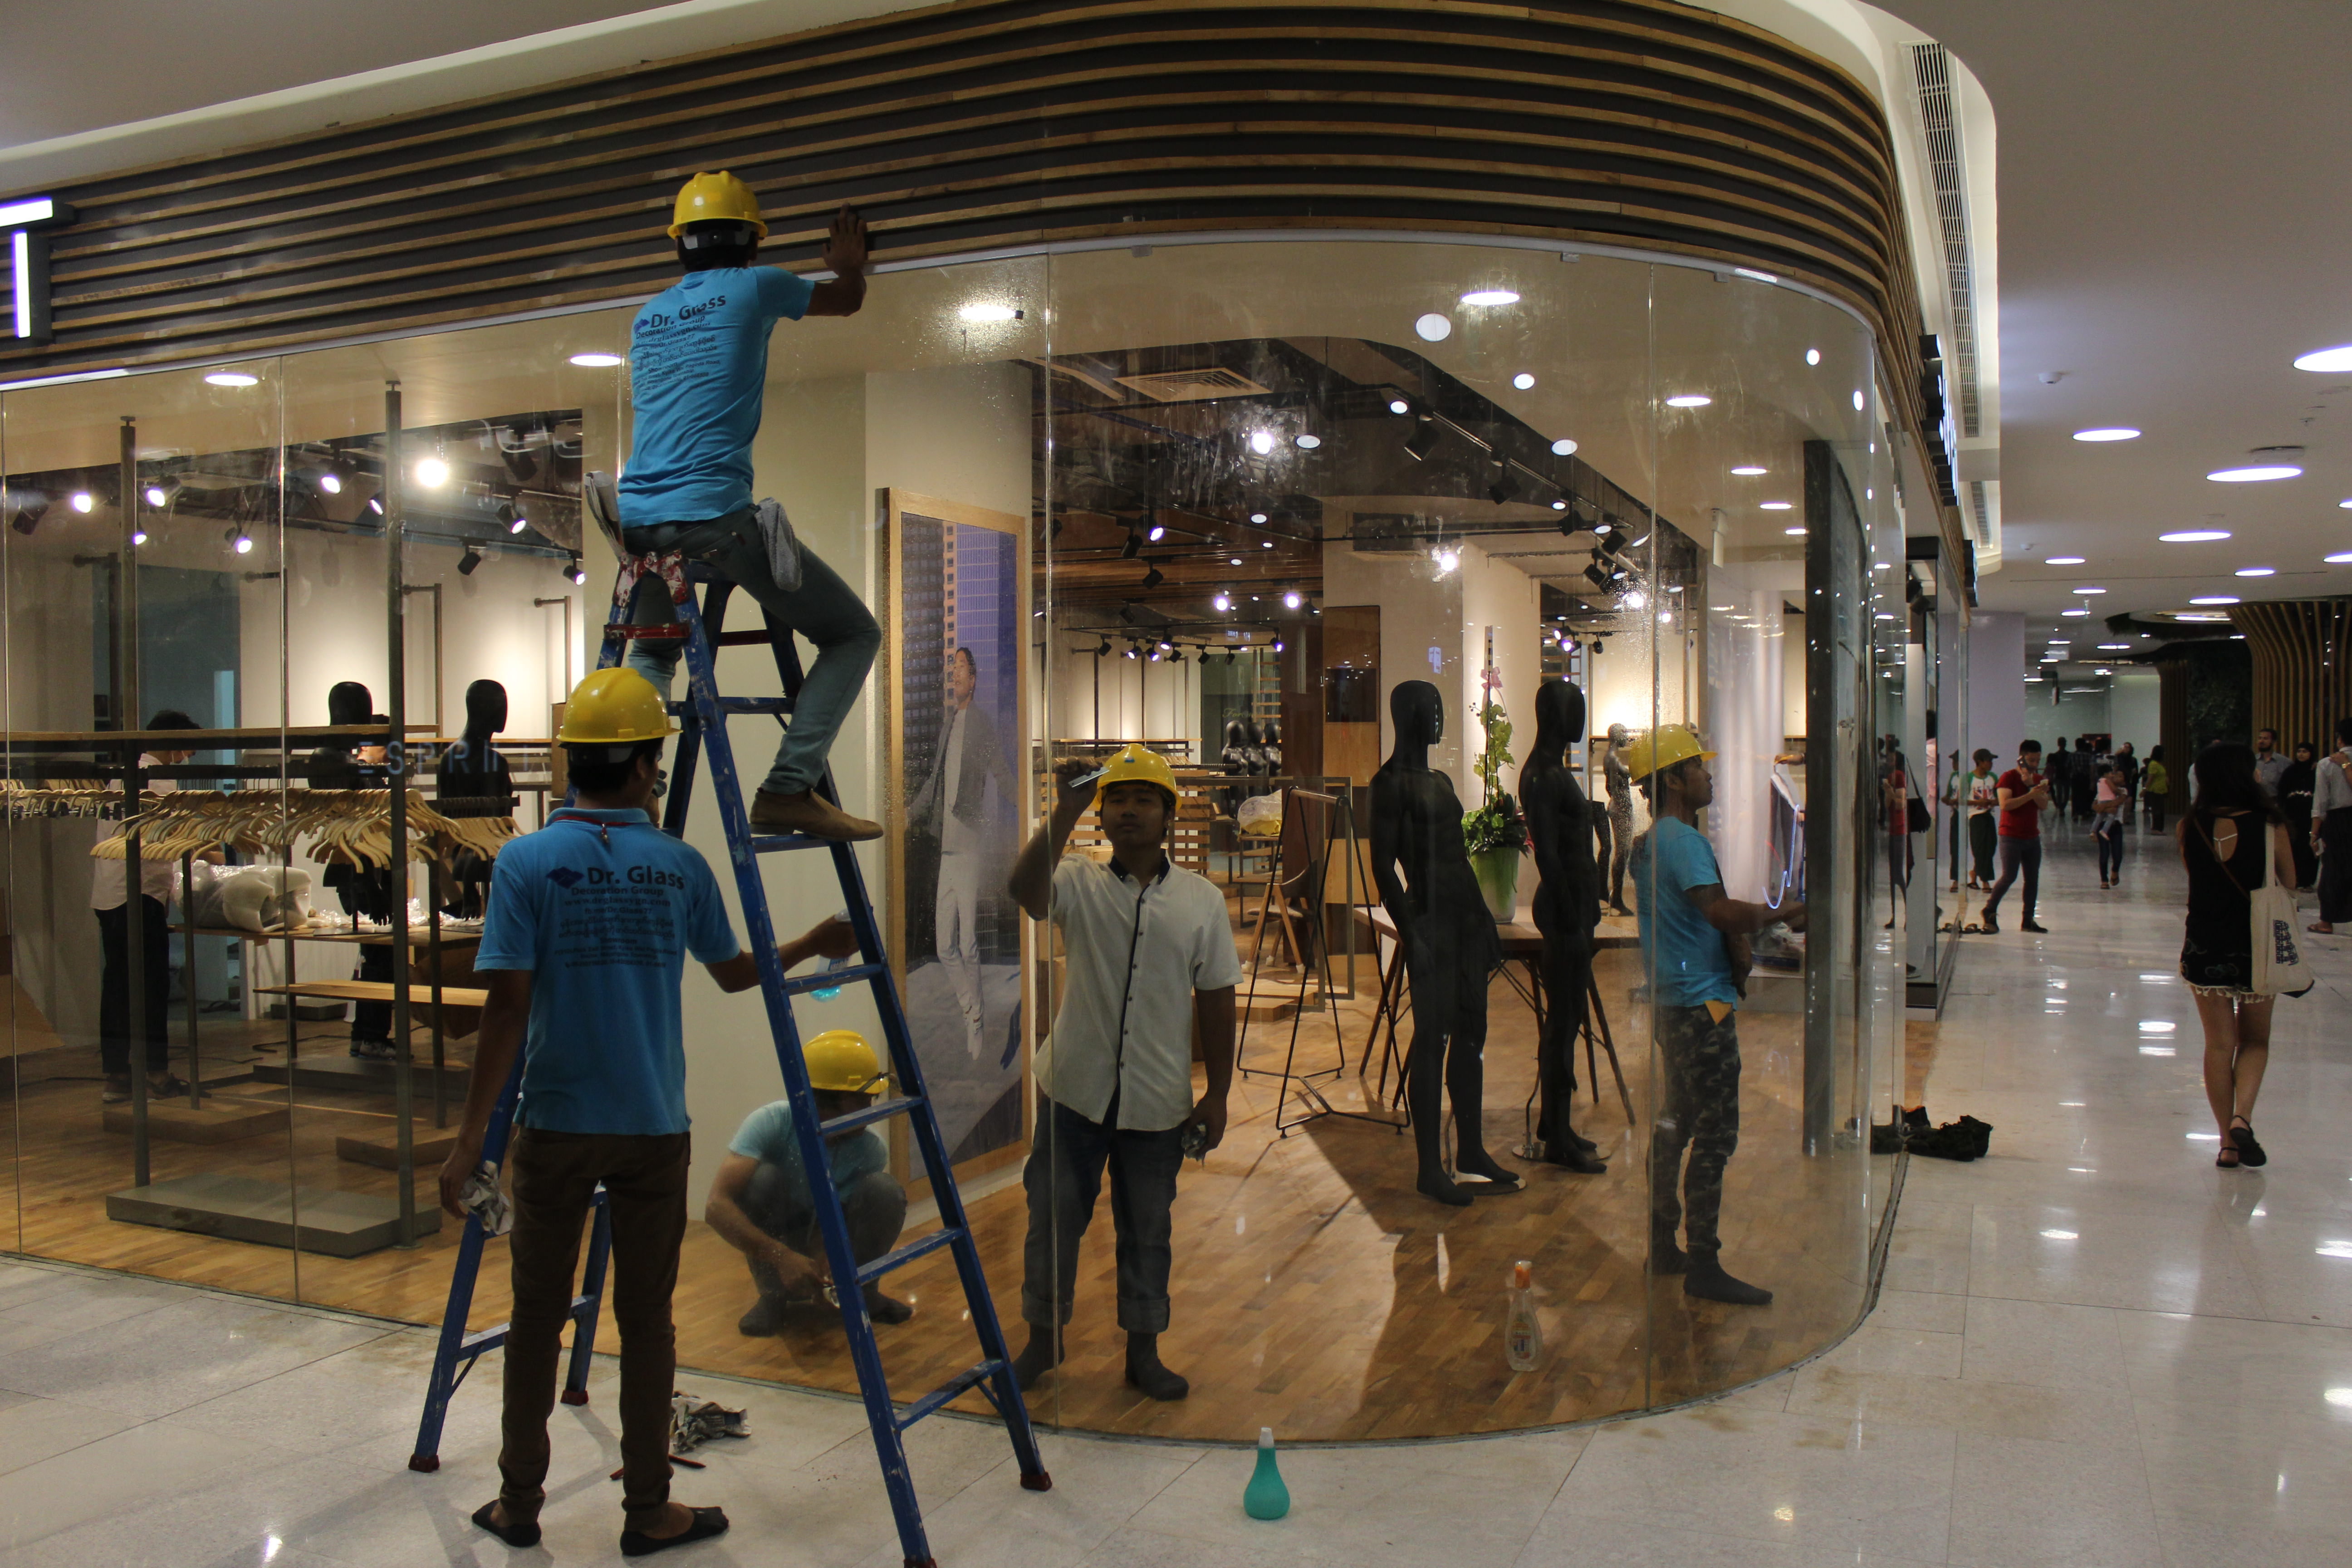 Construction workers work on a shop in Yangon’s Junction City mall on its opening day on March 27, 2017. Photo: Jacob Goldberg